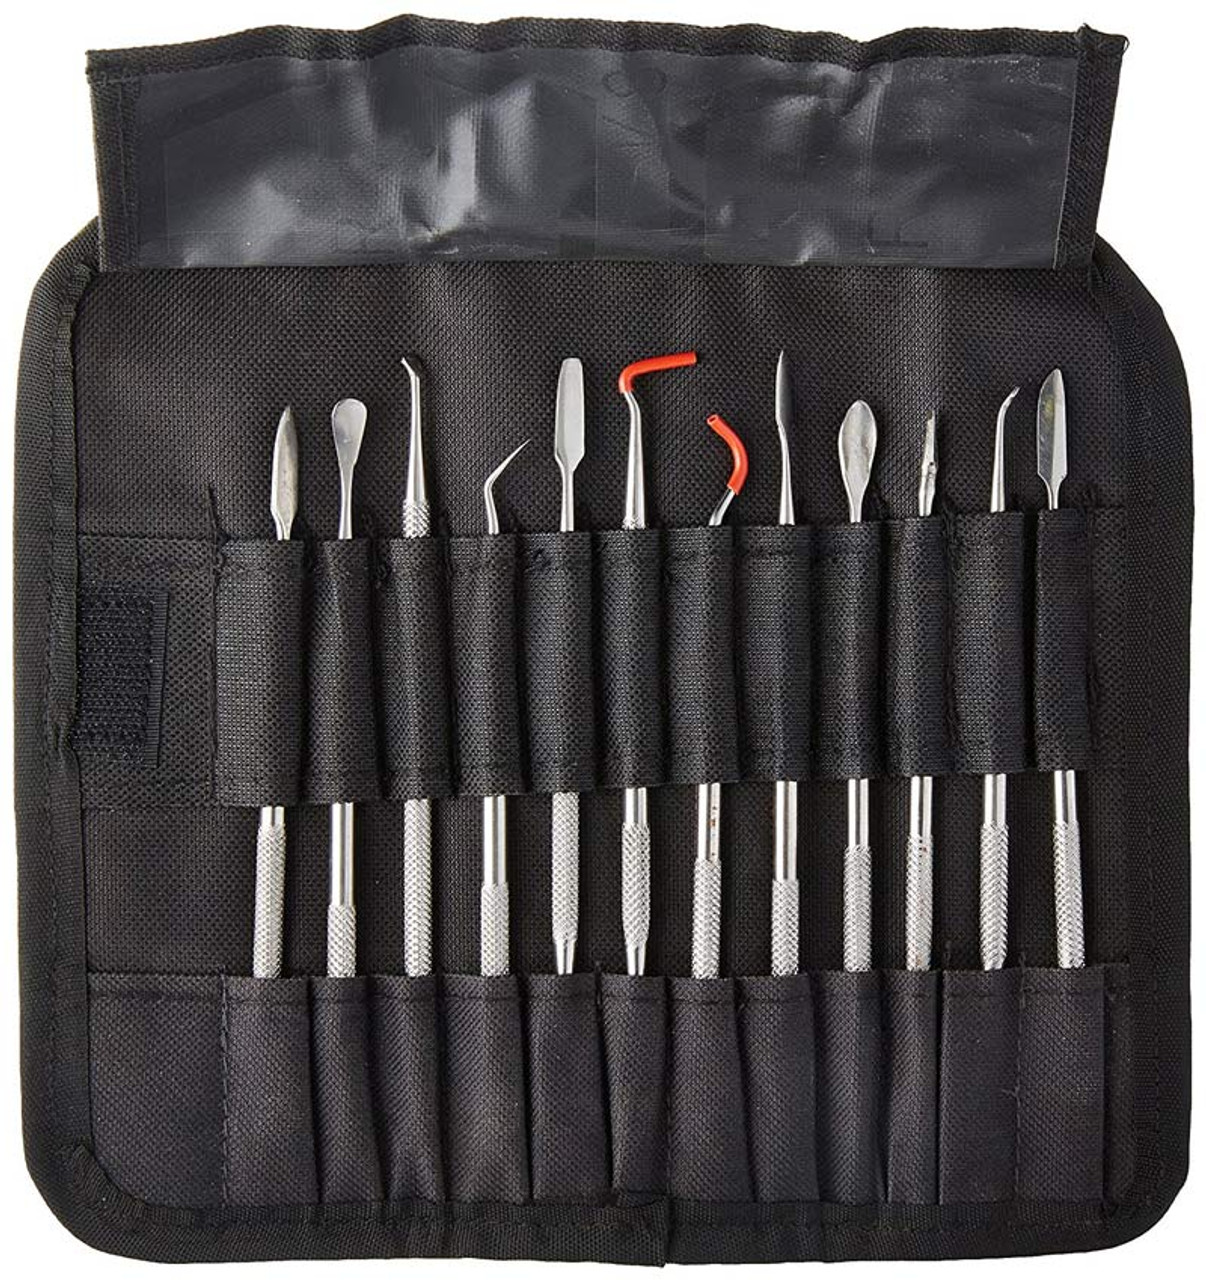 12pc Wax Carver Tool Set Clay Soap Detailed Carving Modelling Sculpting  Craft 